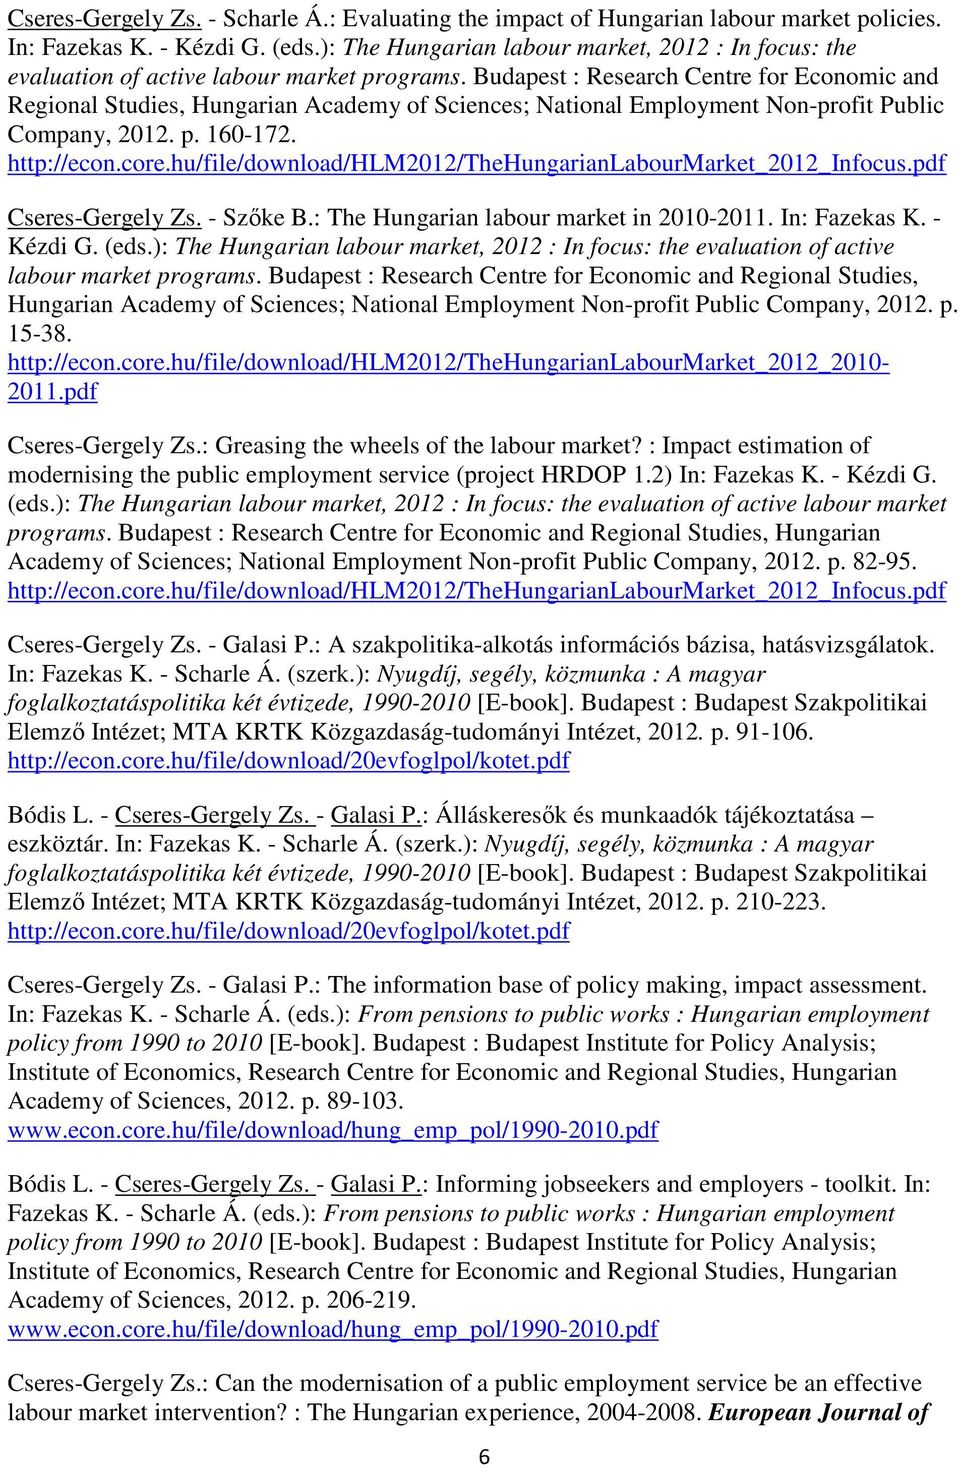 Budapest : Research Centre for Economic and Regional Studies, Hungarian Academy of Sciences; National Employment Non-profit Public Company, 2012. p. 160-172. http://econ.core.